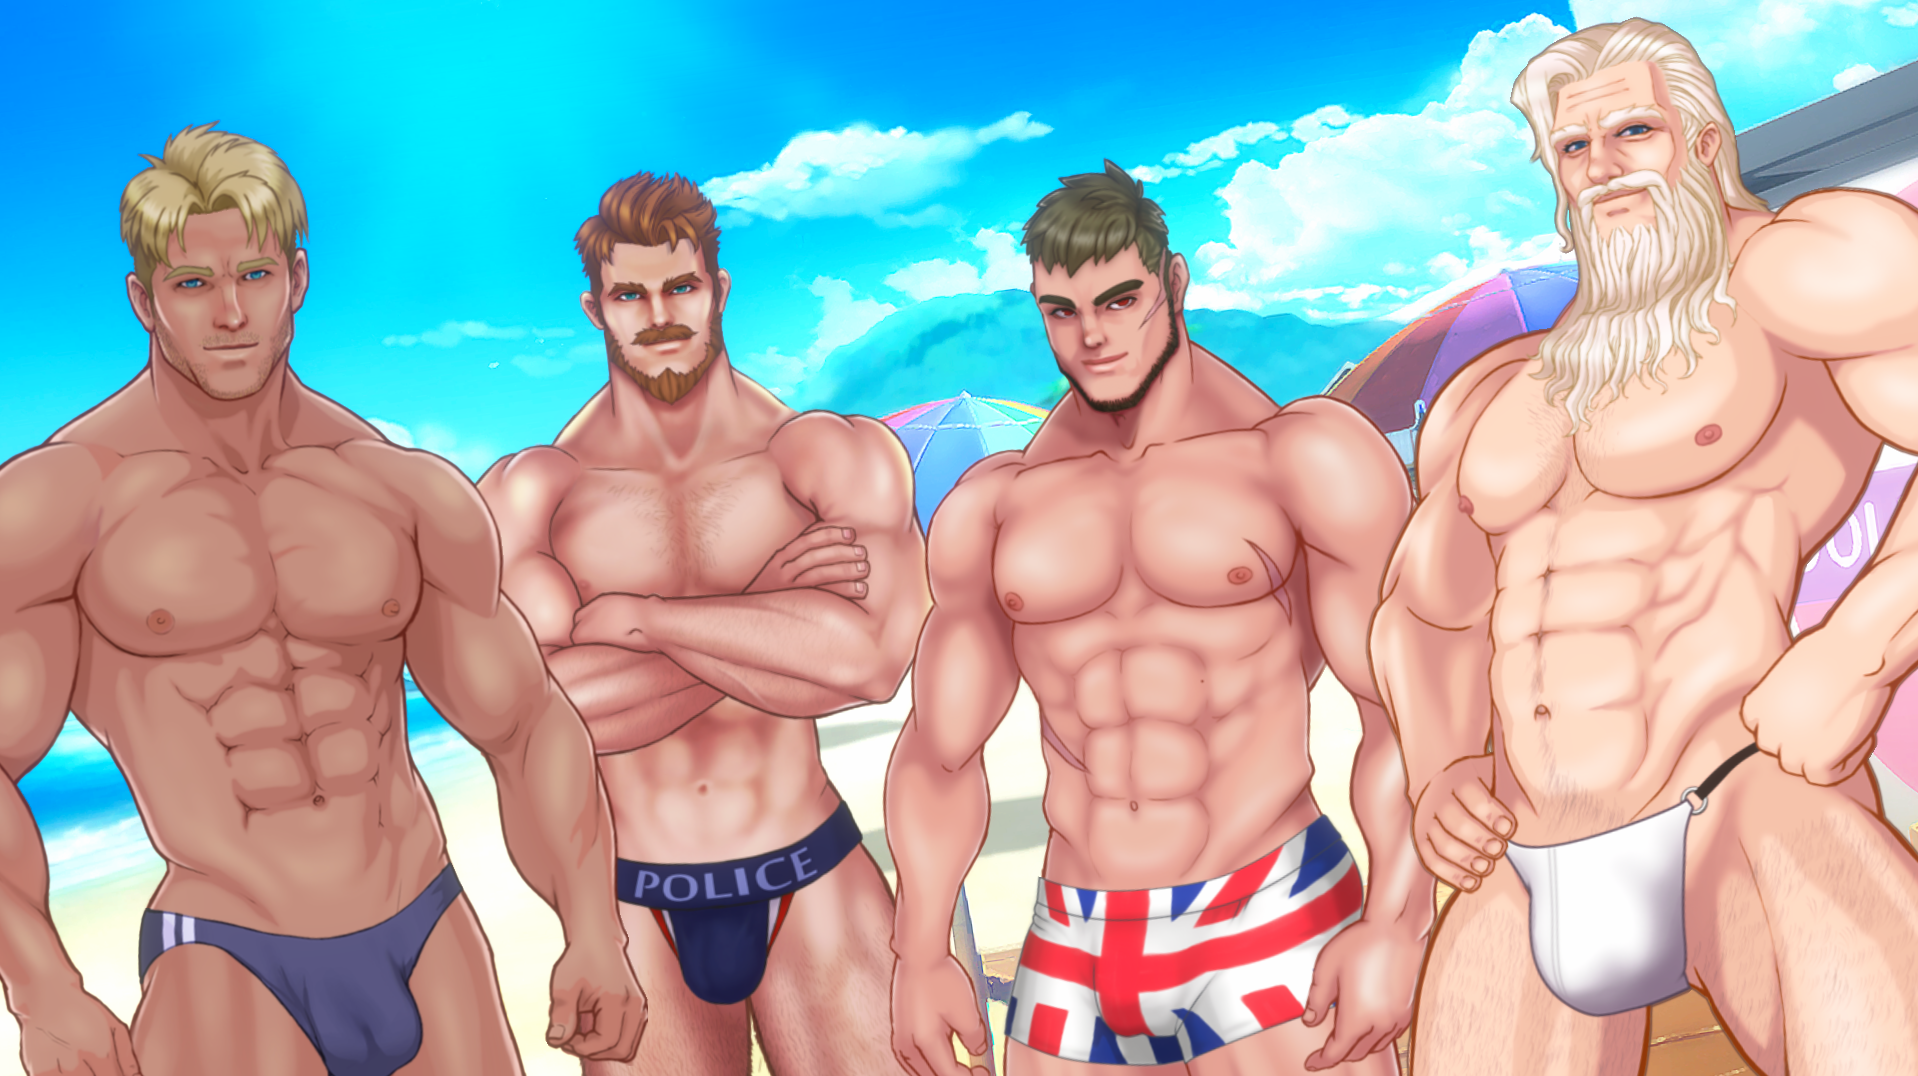 Just found this new gay dating sim project, it looks great, it has animatio...